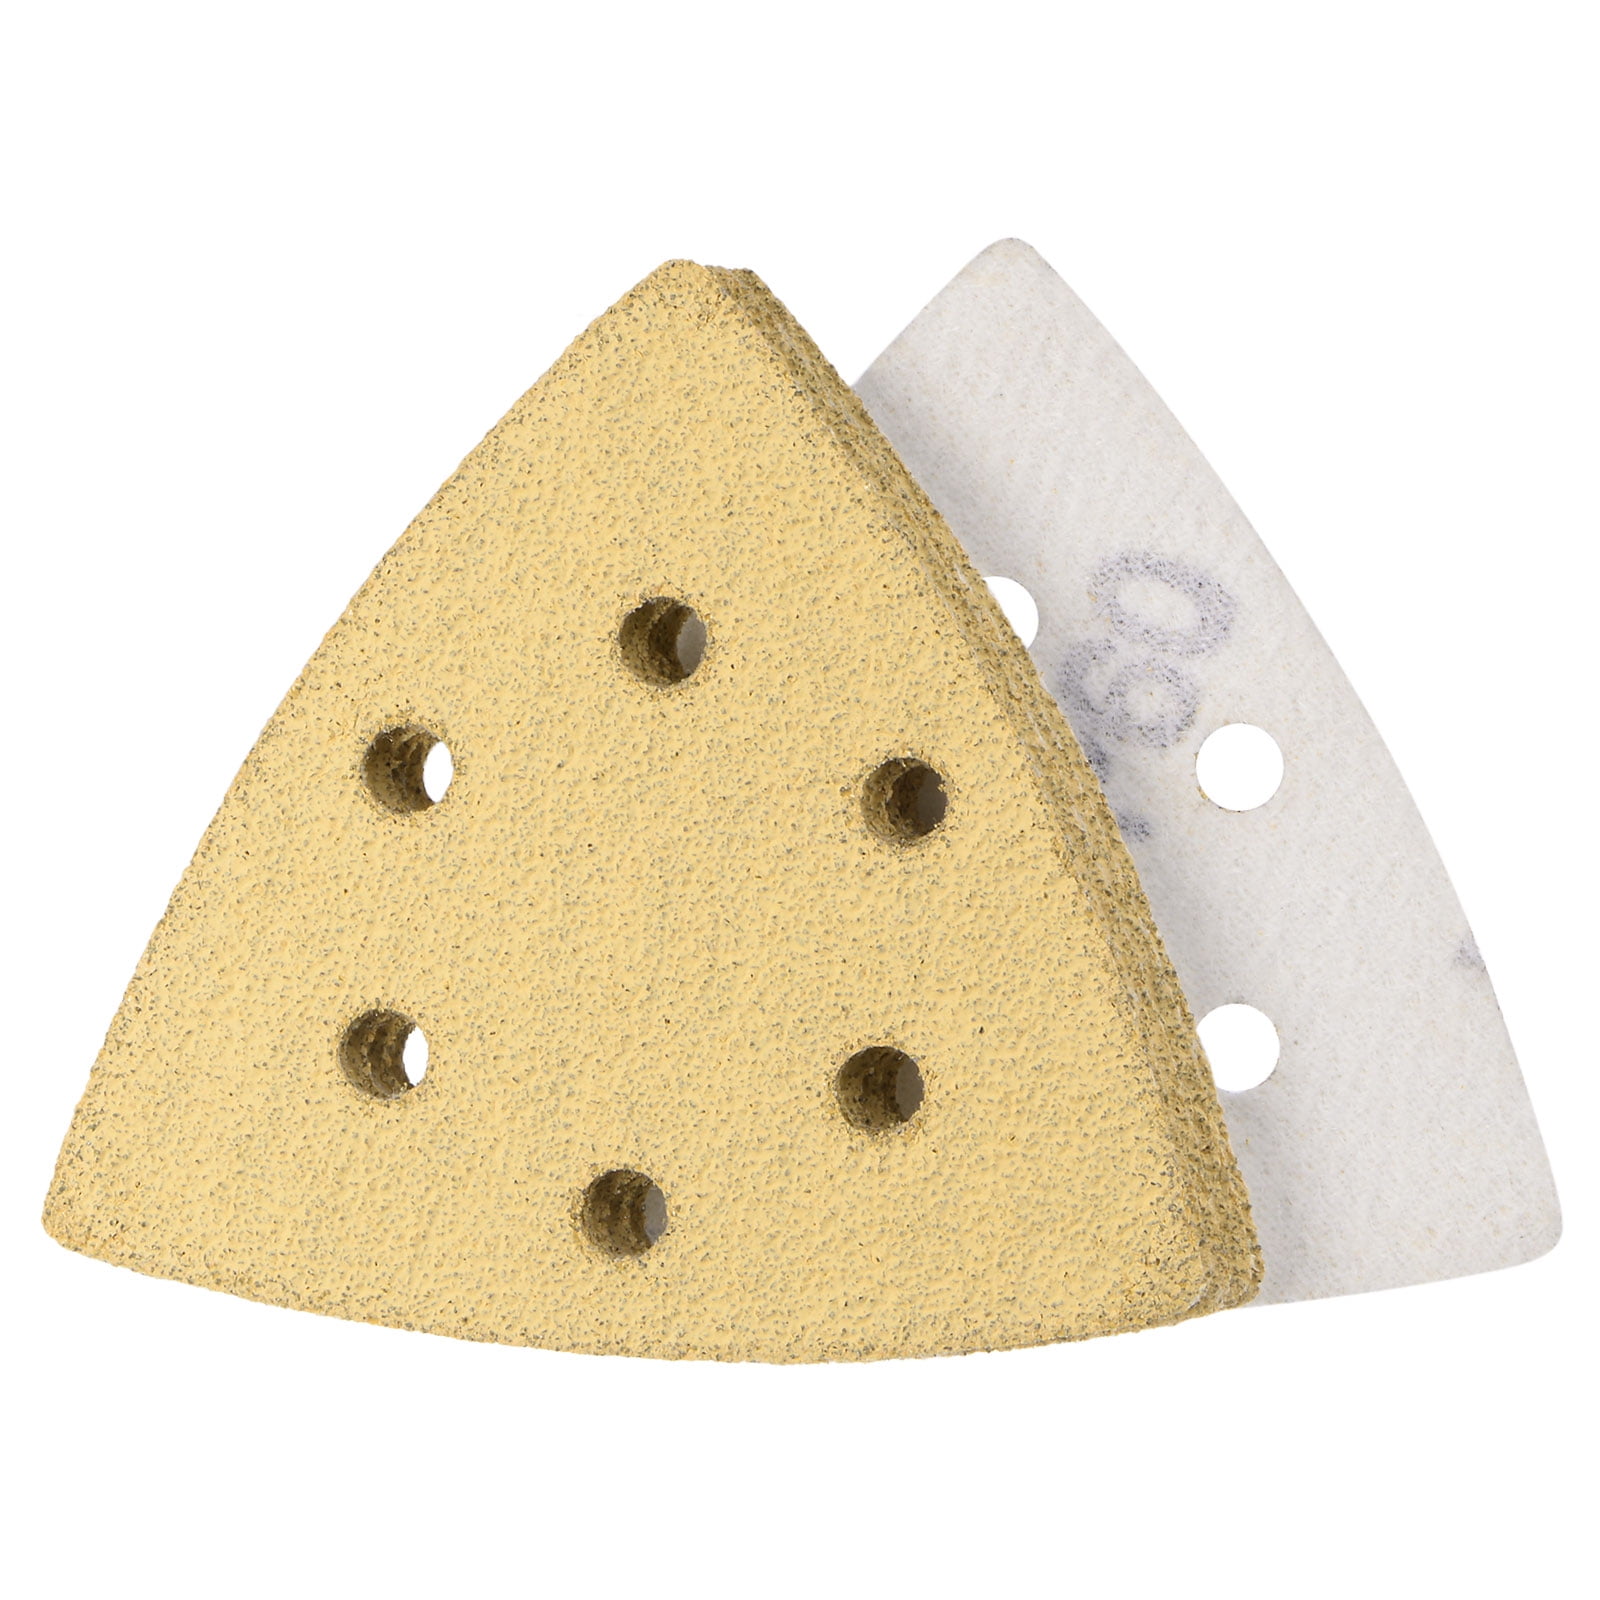 uxcell 5 Holes Triangle Detail Sander 40 Grits Hook and Loop Sandpaper Pad 5-1/2 Inch Golden 12 Pcs 